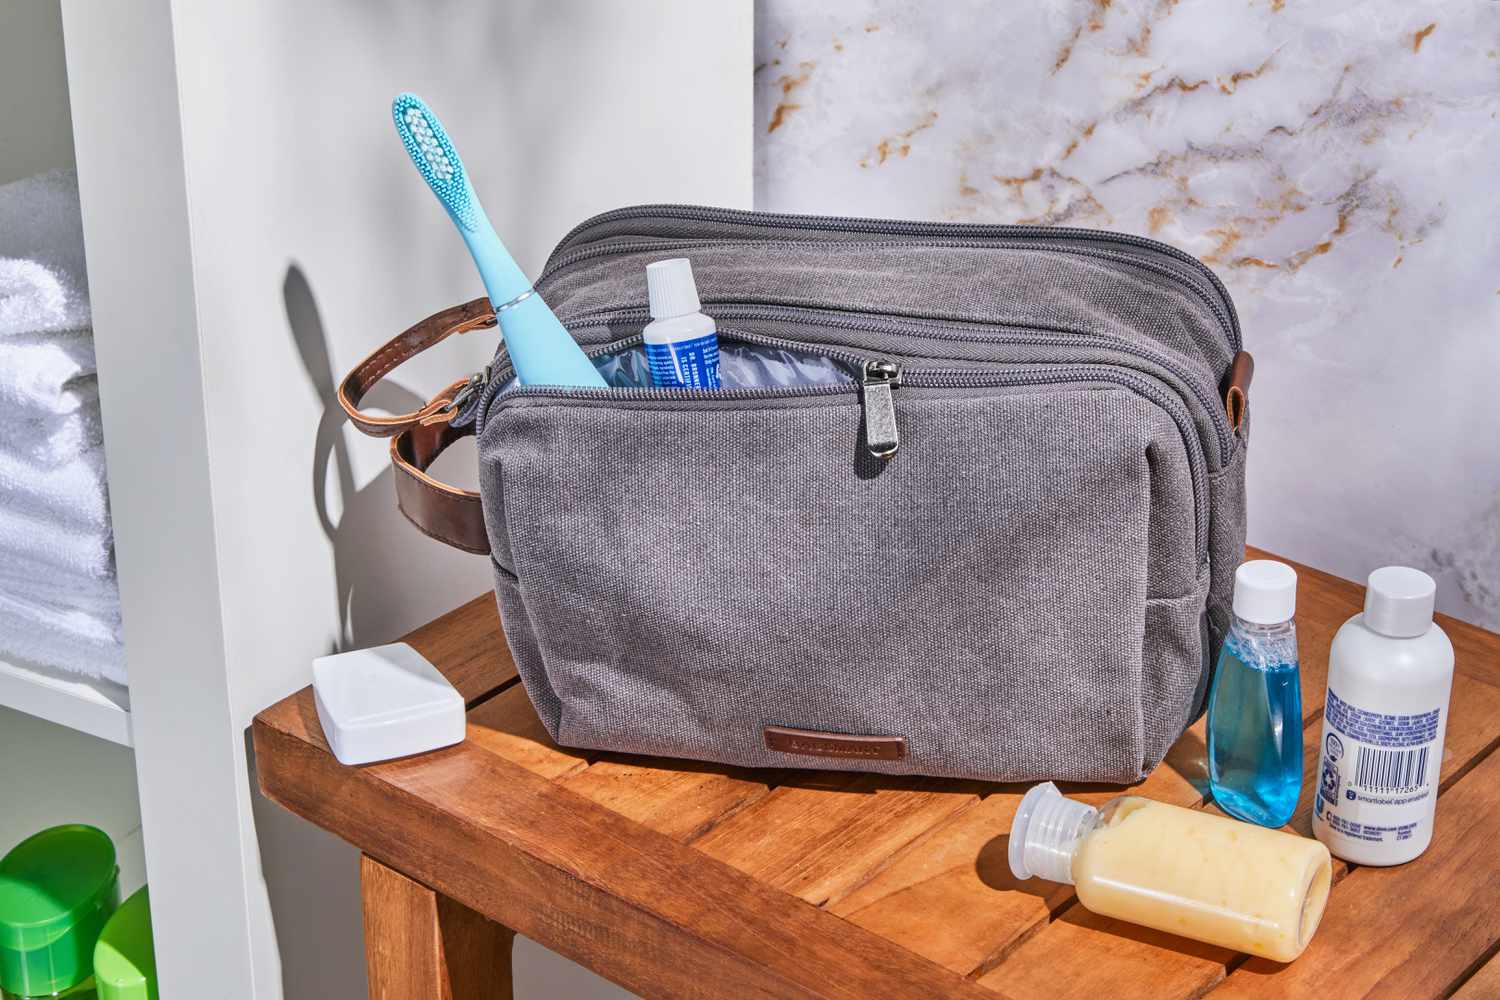 Bagsmart Toiletry Bag side compartment opened with a toothbrush and toothpaste sticking out